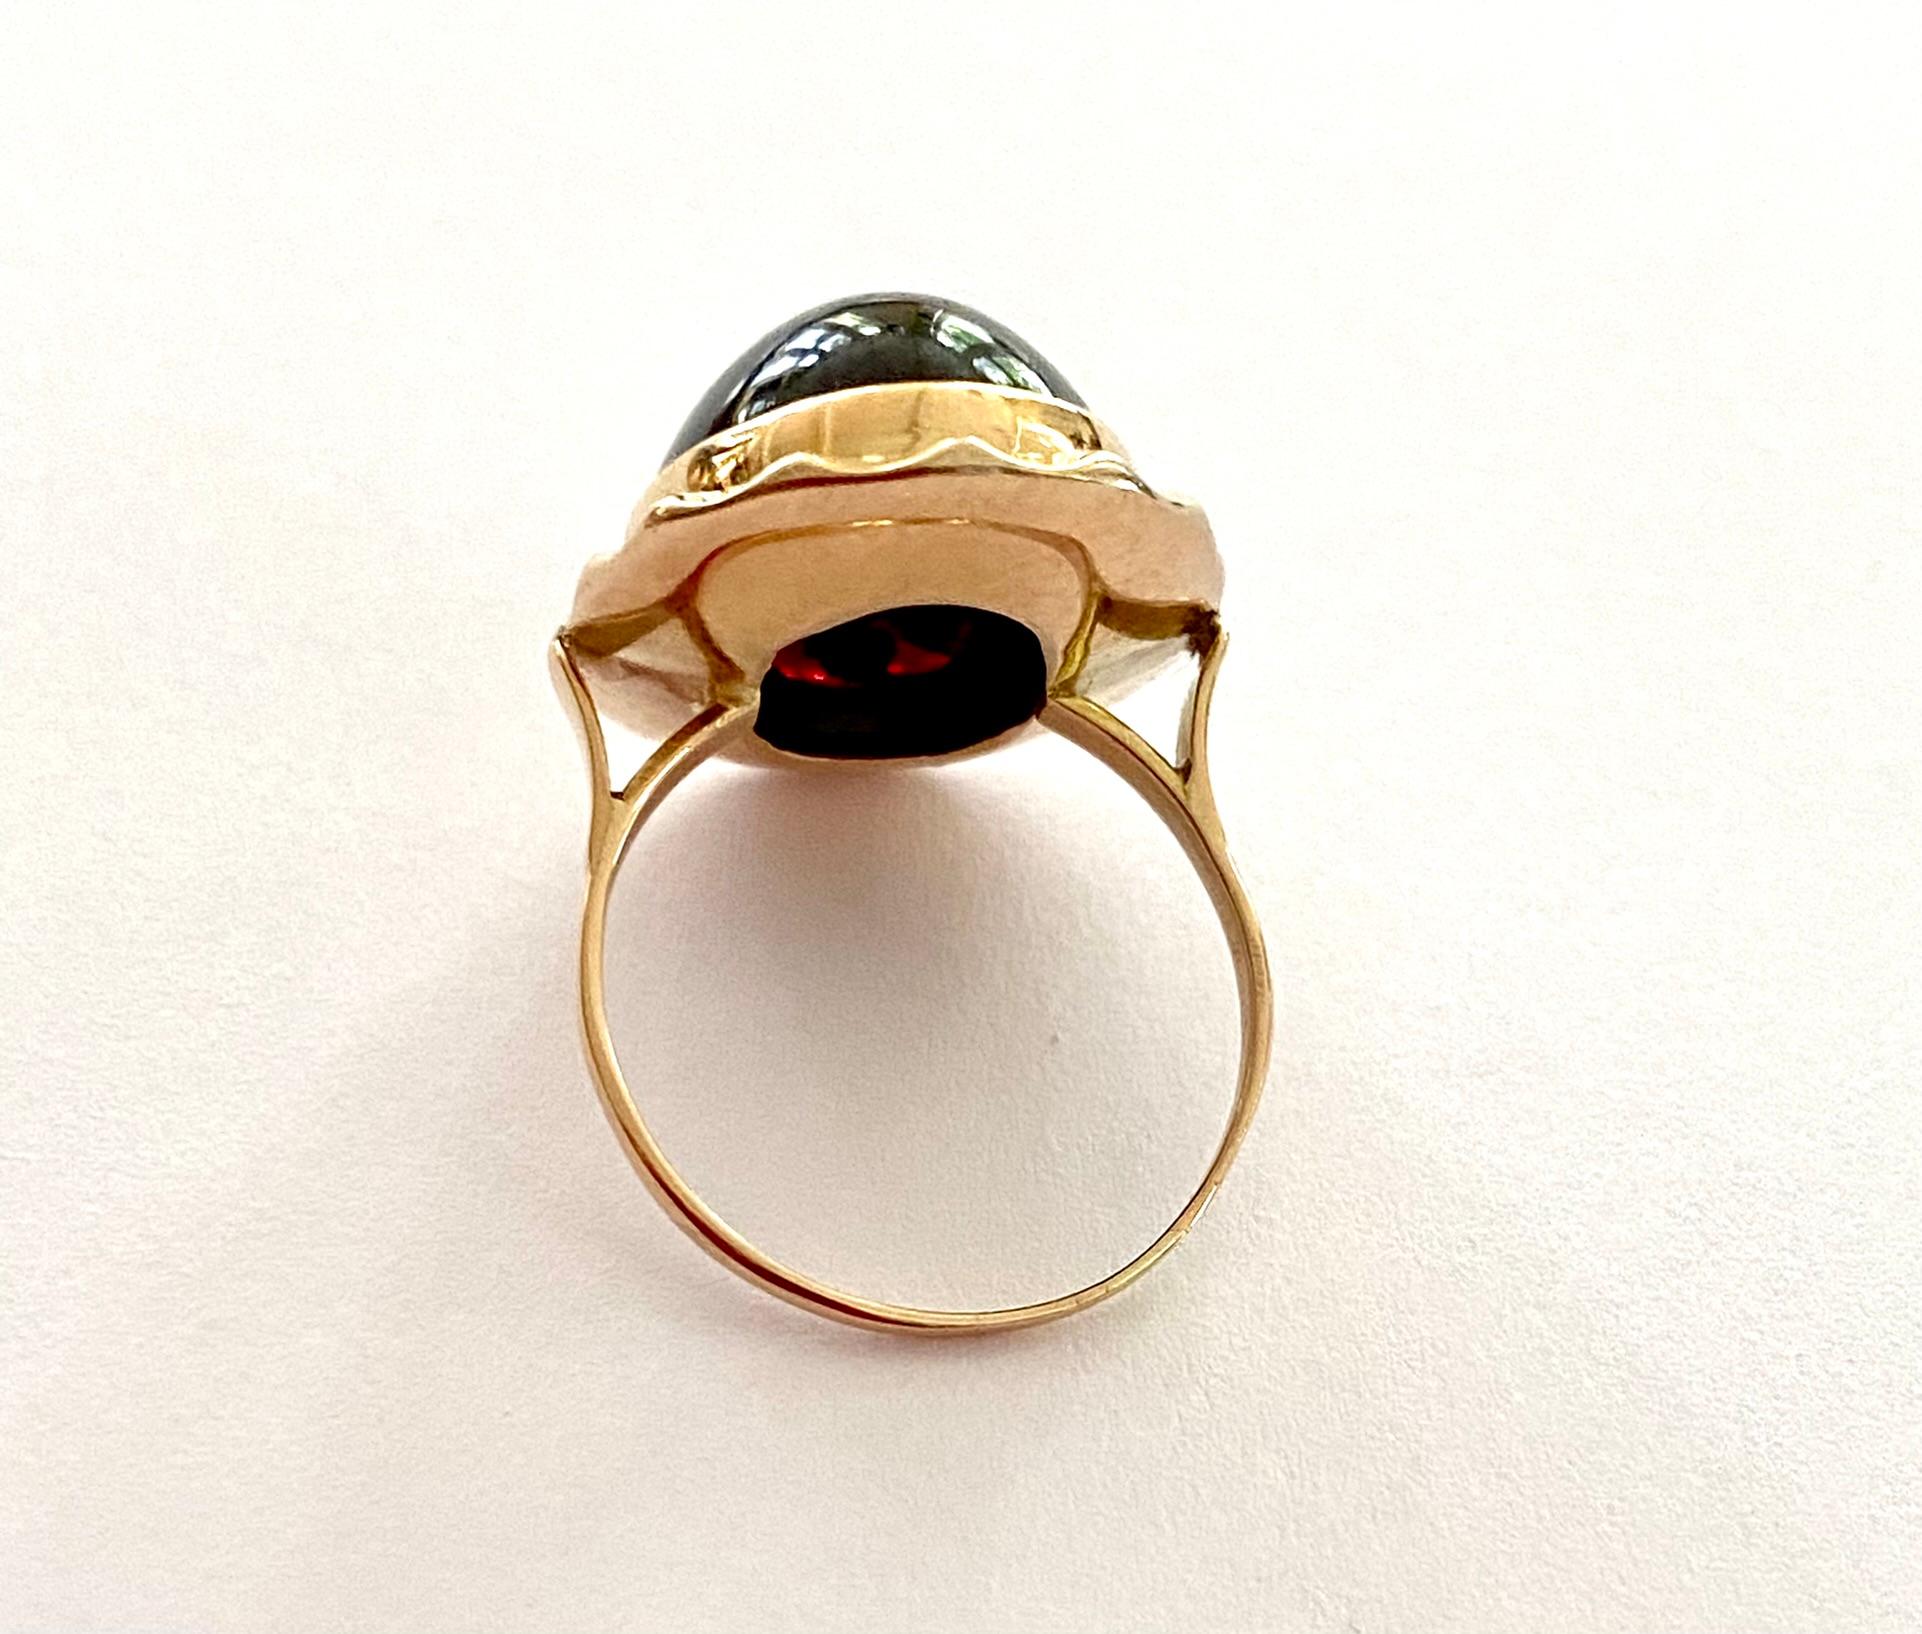 Cabochon 14K. Yellow Gold Garnet Ring, Cabuchon Cut, Netherlands, ca 1960 For Sale